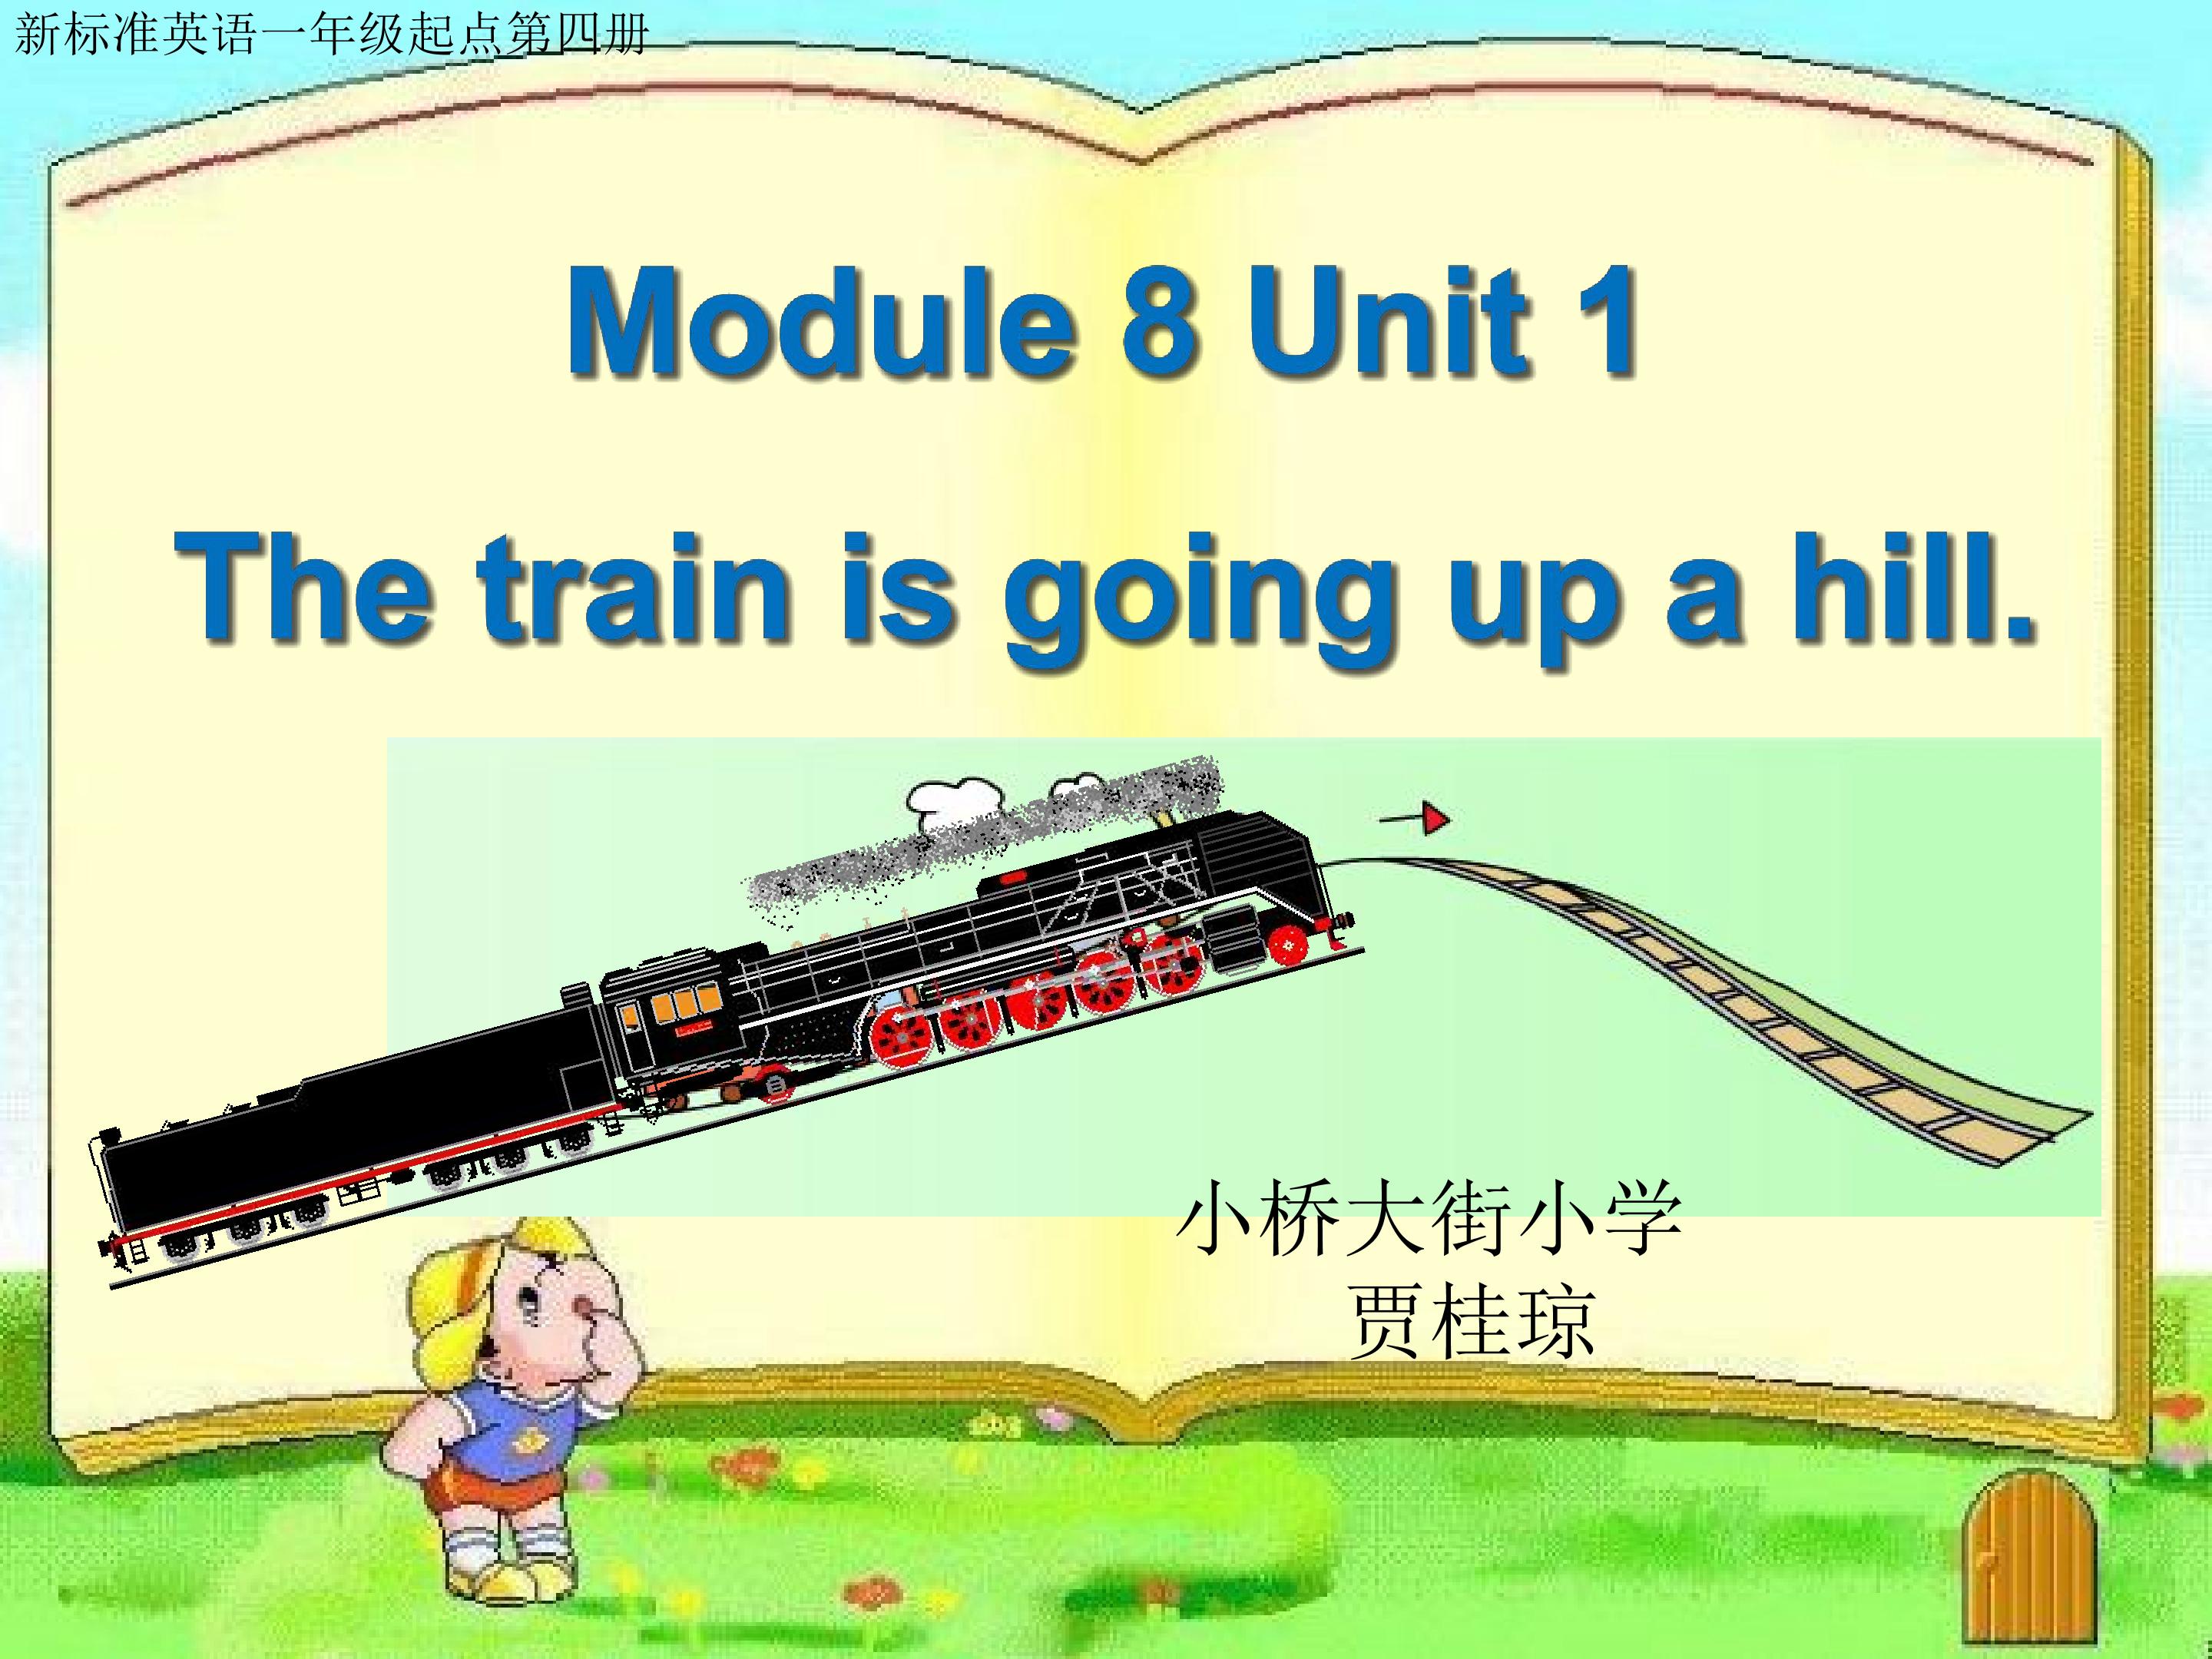 Unit 1 The train is going up a hill.